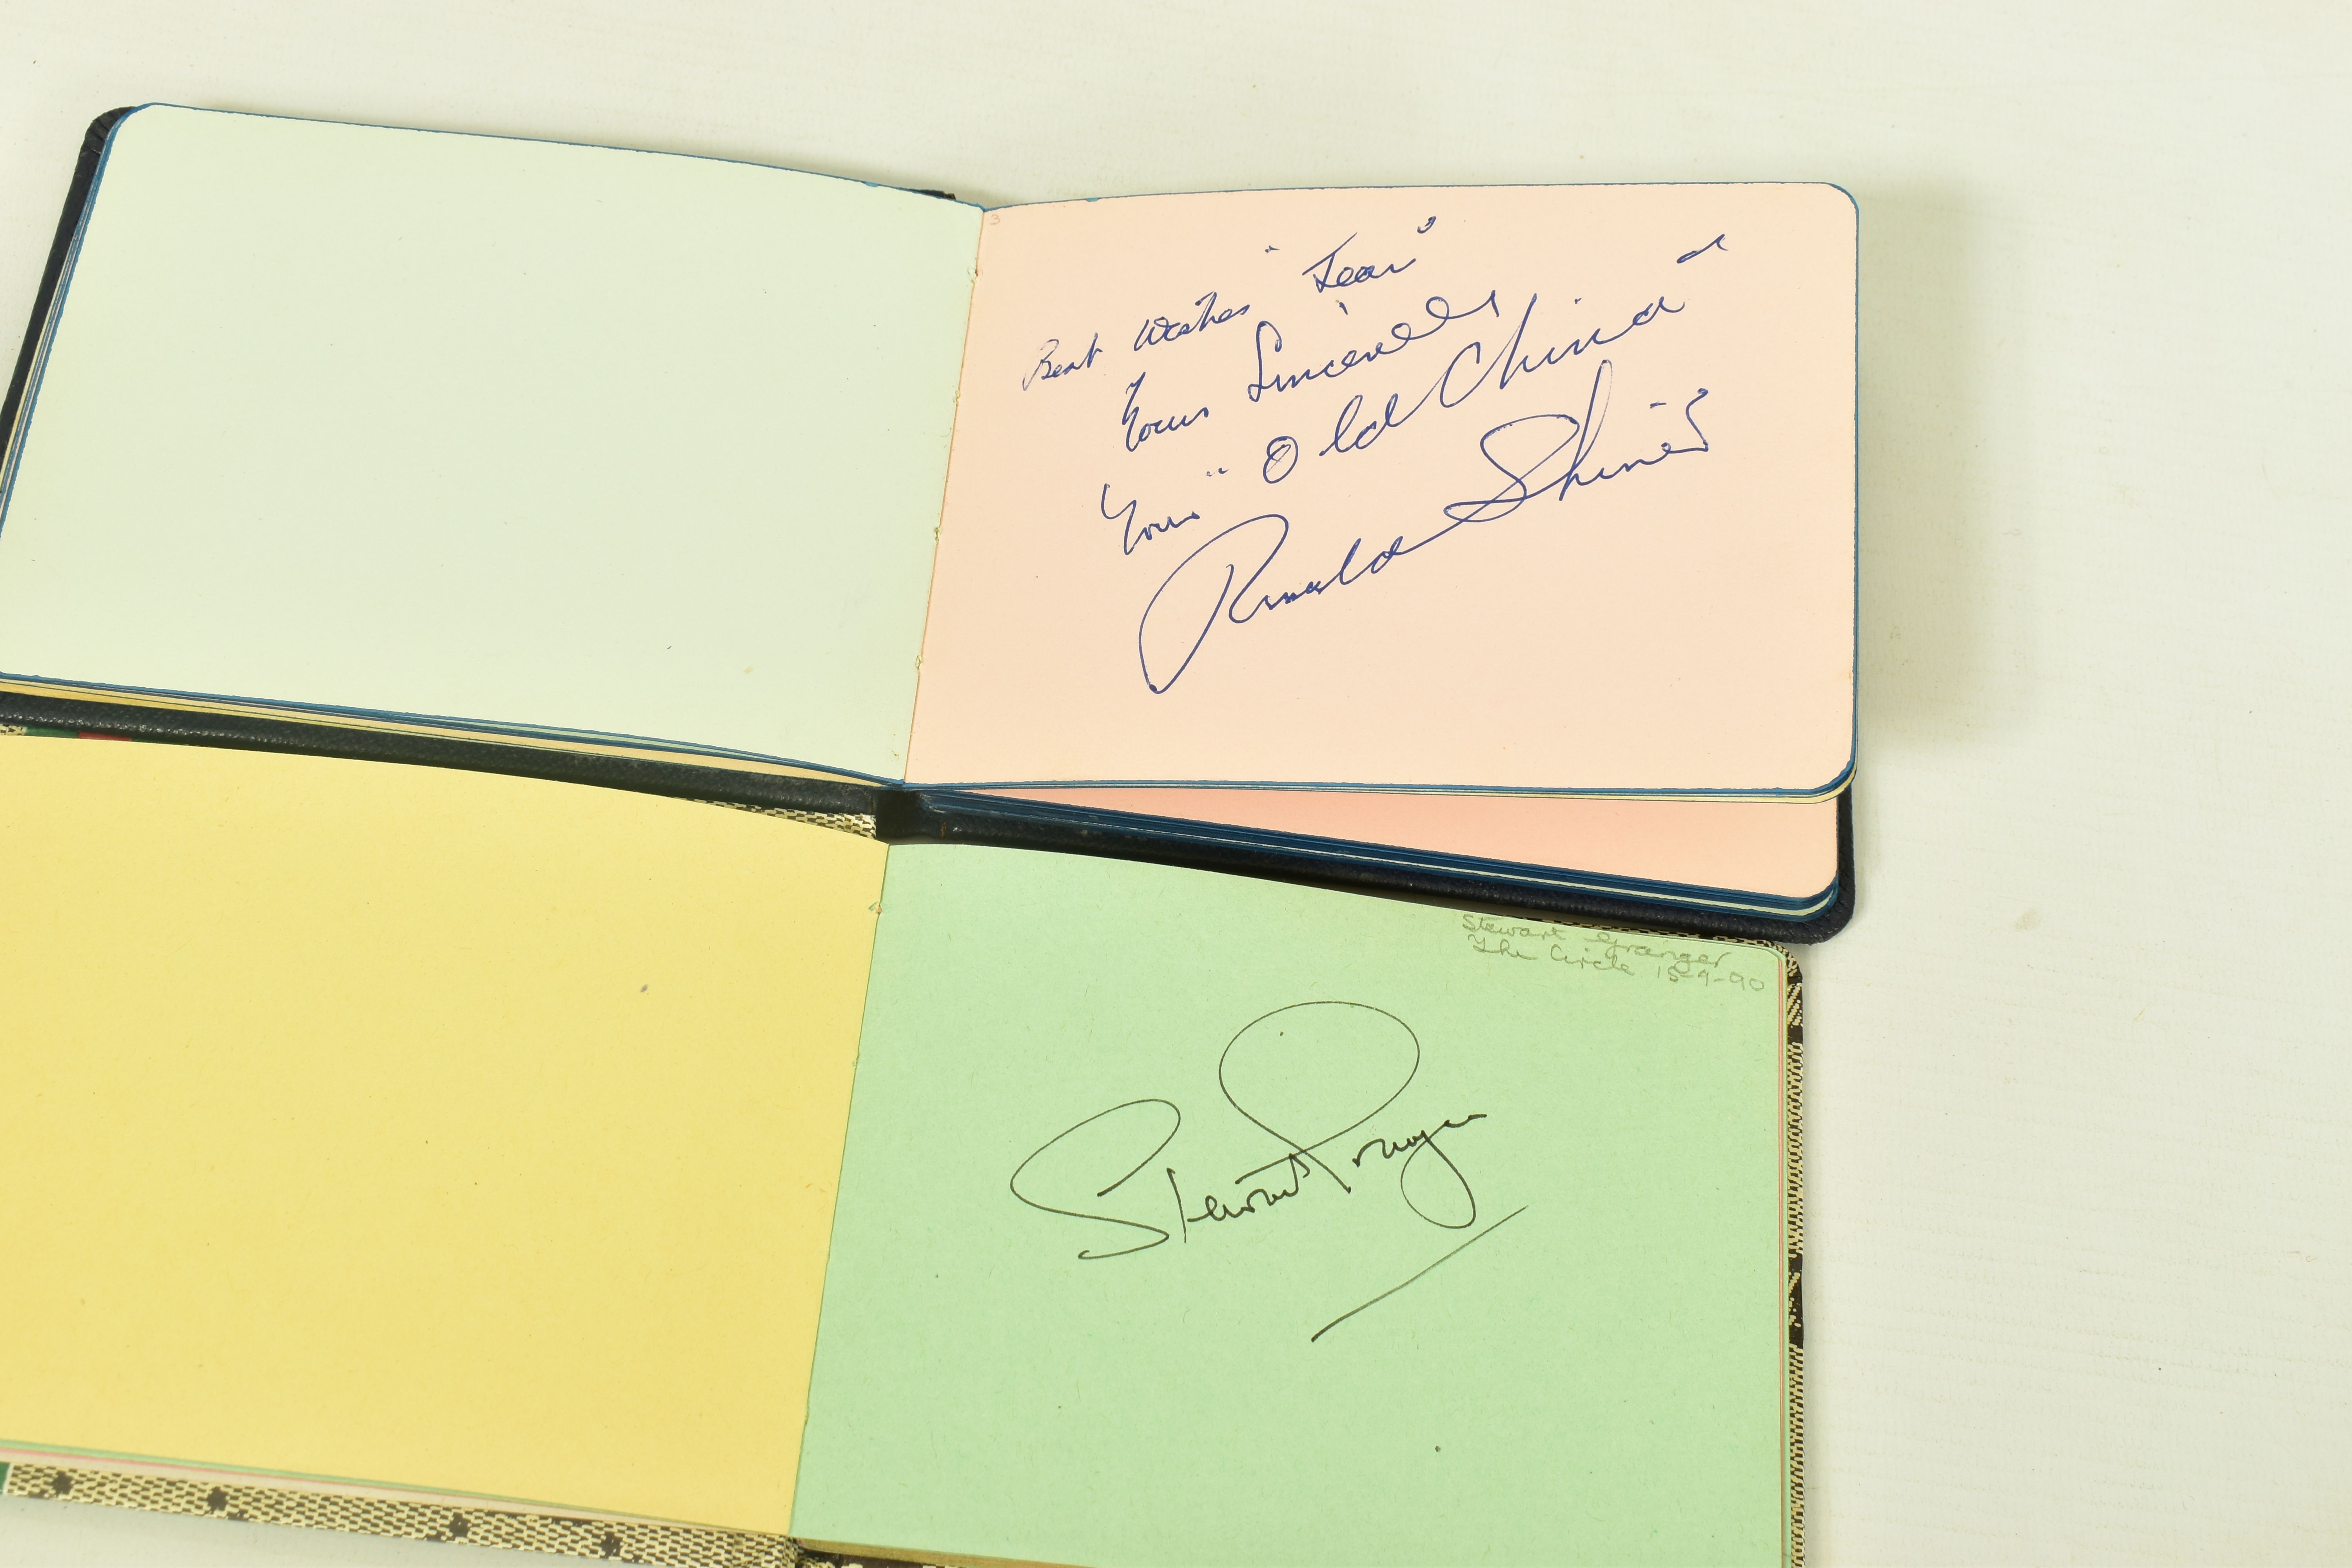 FILM & STAGE AUTOGRAPH ALBUM, a collection of signatures in two autograph albums featuring some of - Image 5 of 8